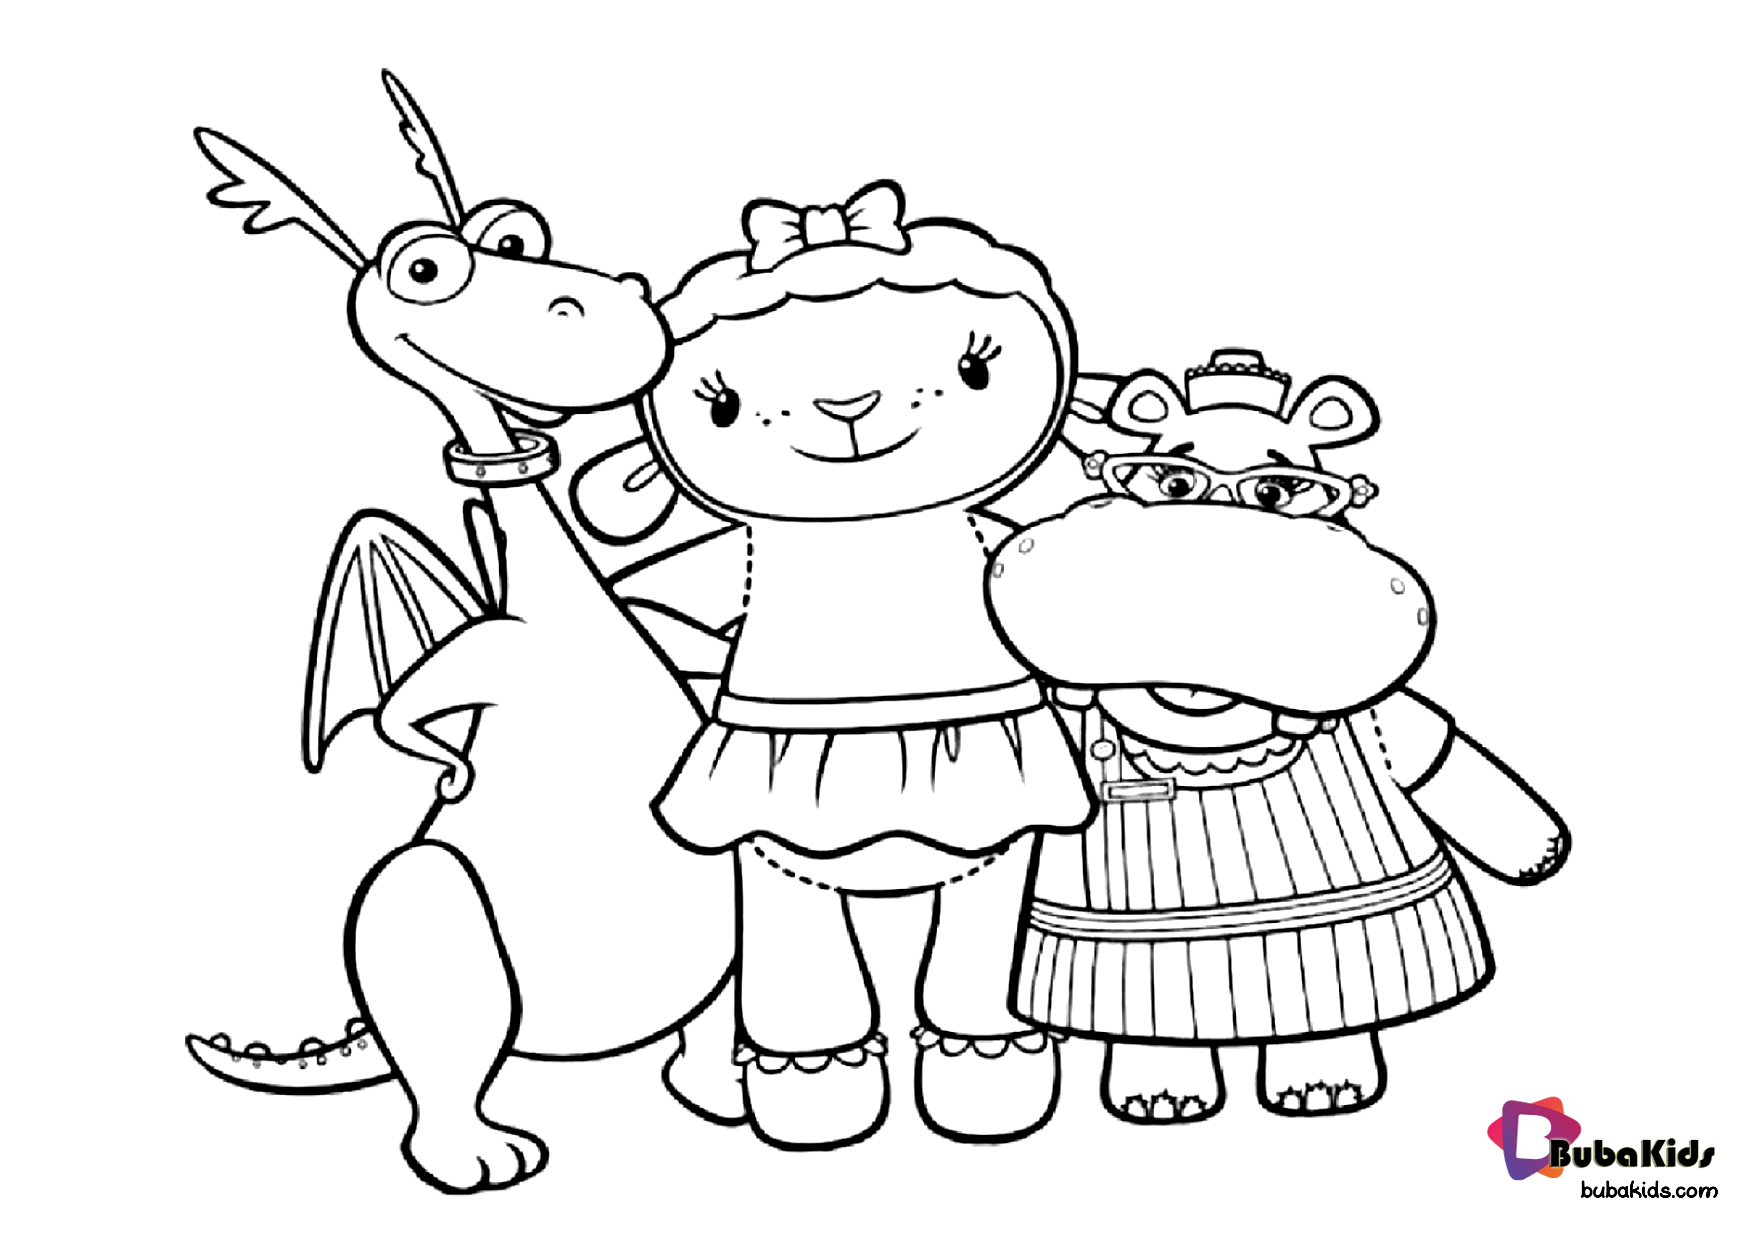 Bubakids free coloring page for kids Wallpaper